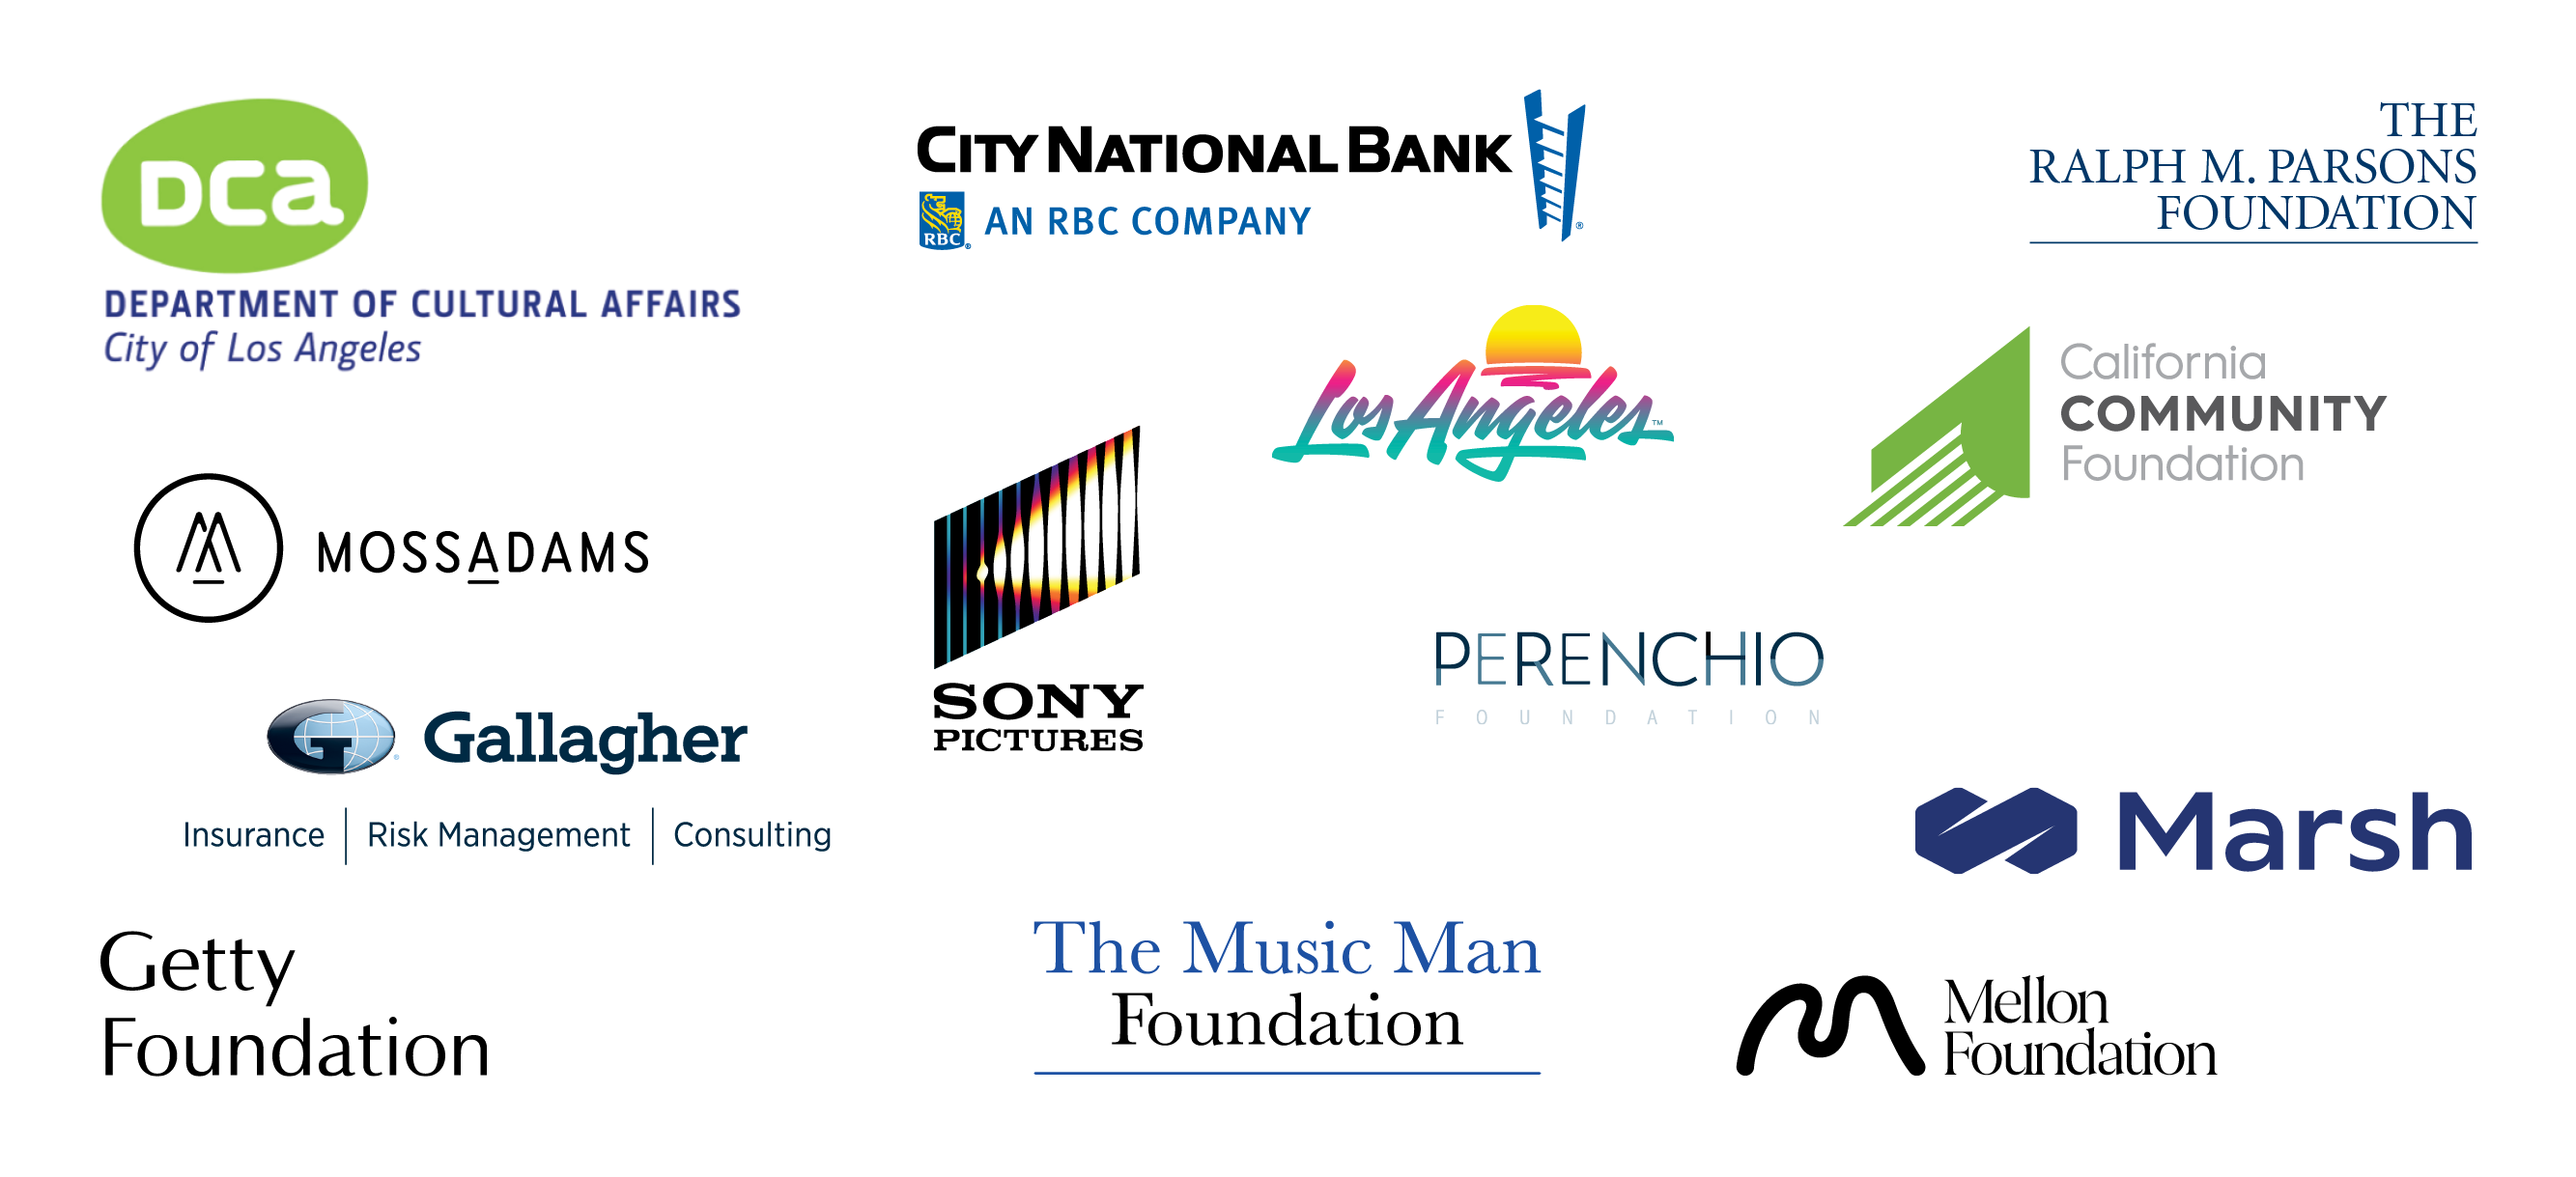 Creative Economy Sponsors: Department of Cultural Affairs: City of Los Angeles, City National Bank: An RBC Company, The Ralph M. Parsons Foundation, MossAdams, Sony Pictures Entertainment, Los Angeles, California Community Foundation, Gallagher, Perenchio, Marsh, Getty Foundation, The Music Man Foundation, Mellon Foundation